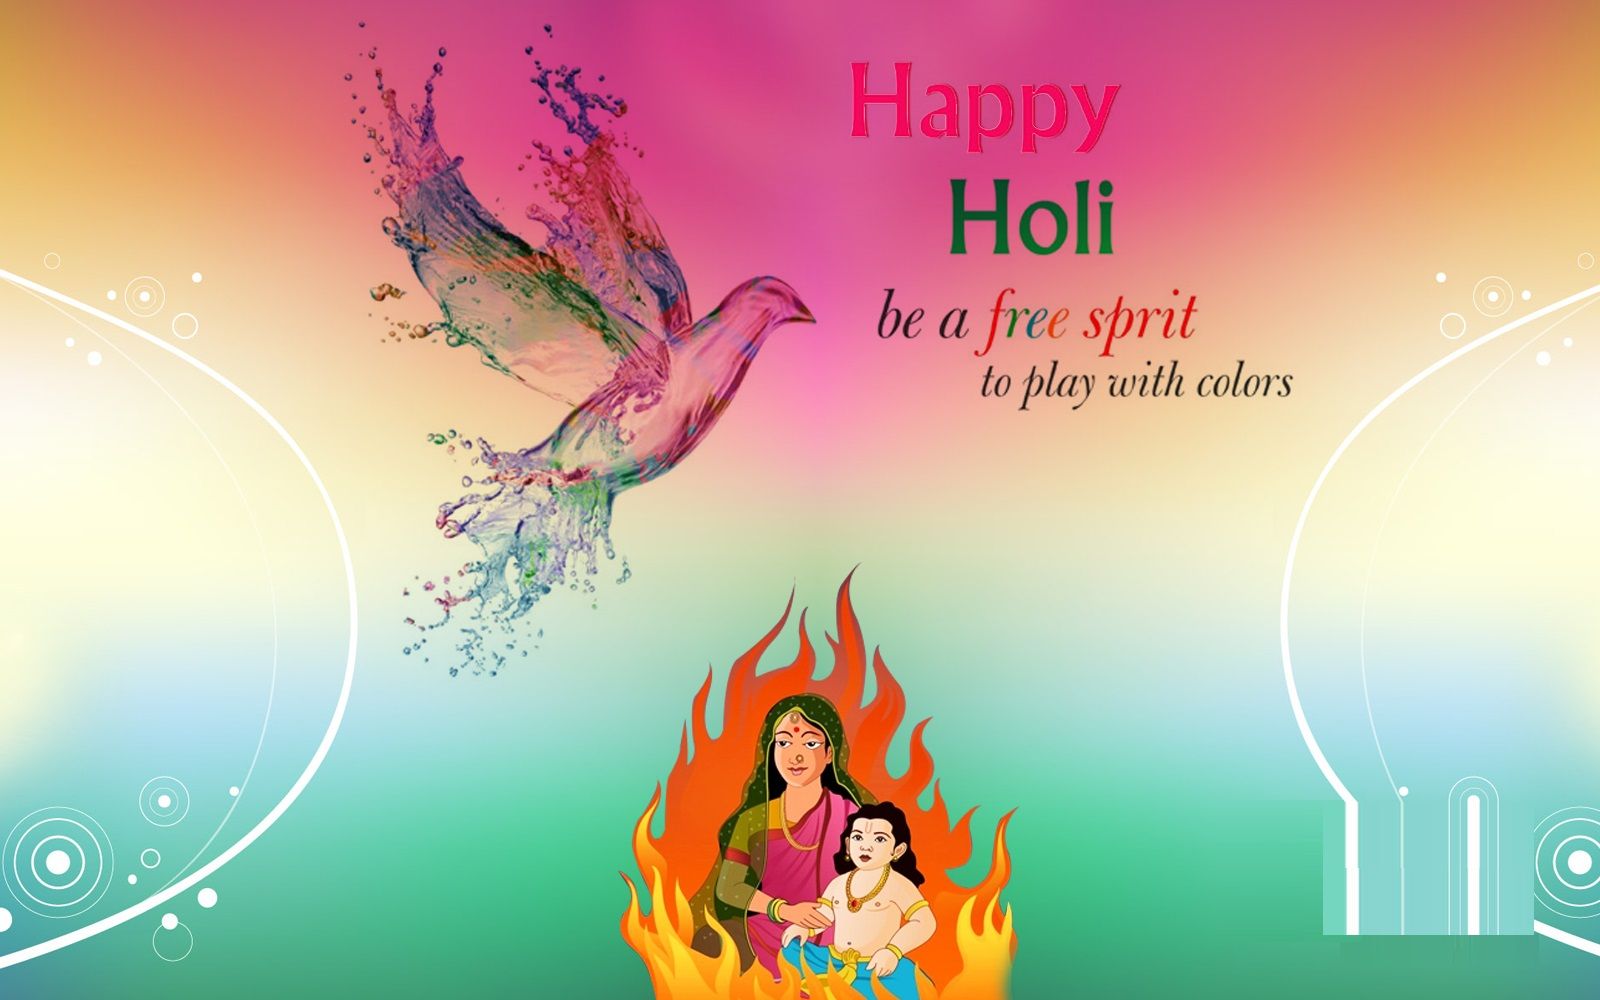 Happy Holika Dahan Images HD & Wishes Messages in Hind English